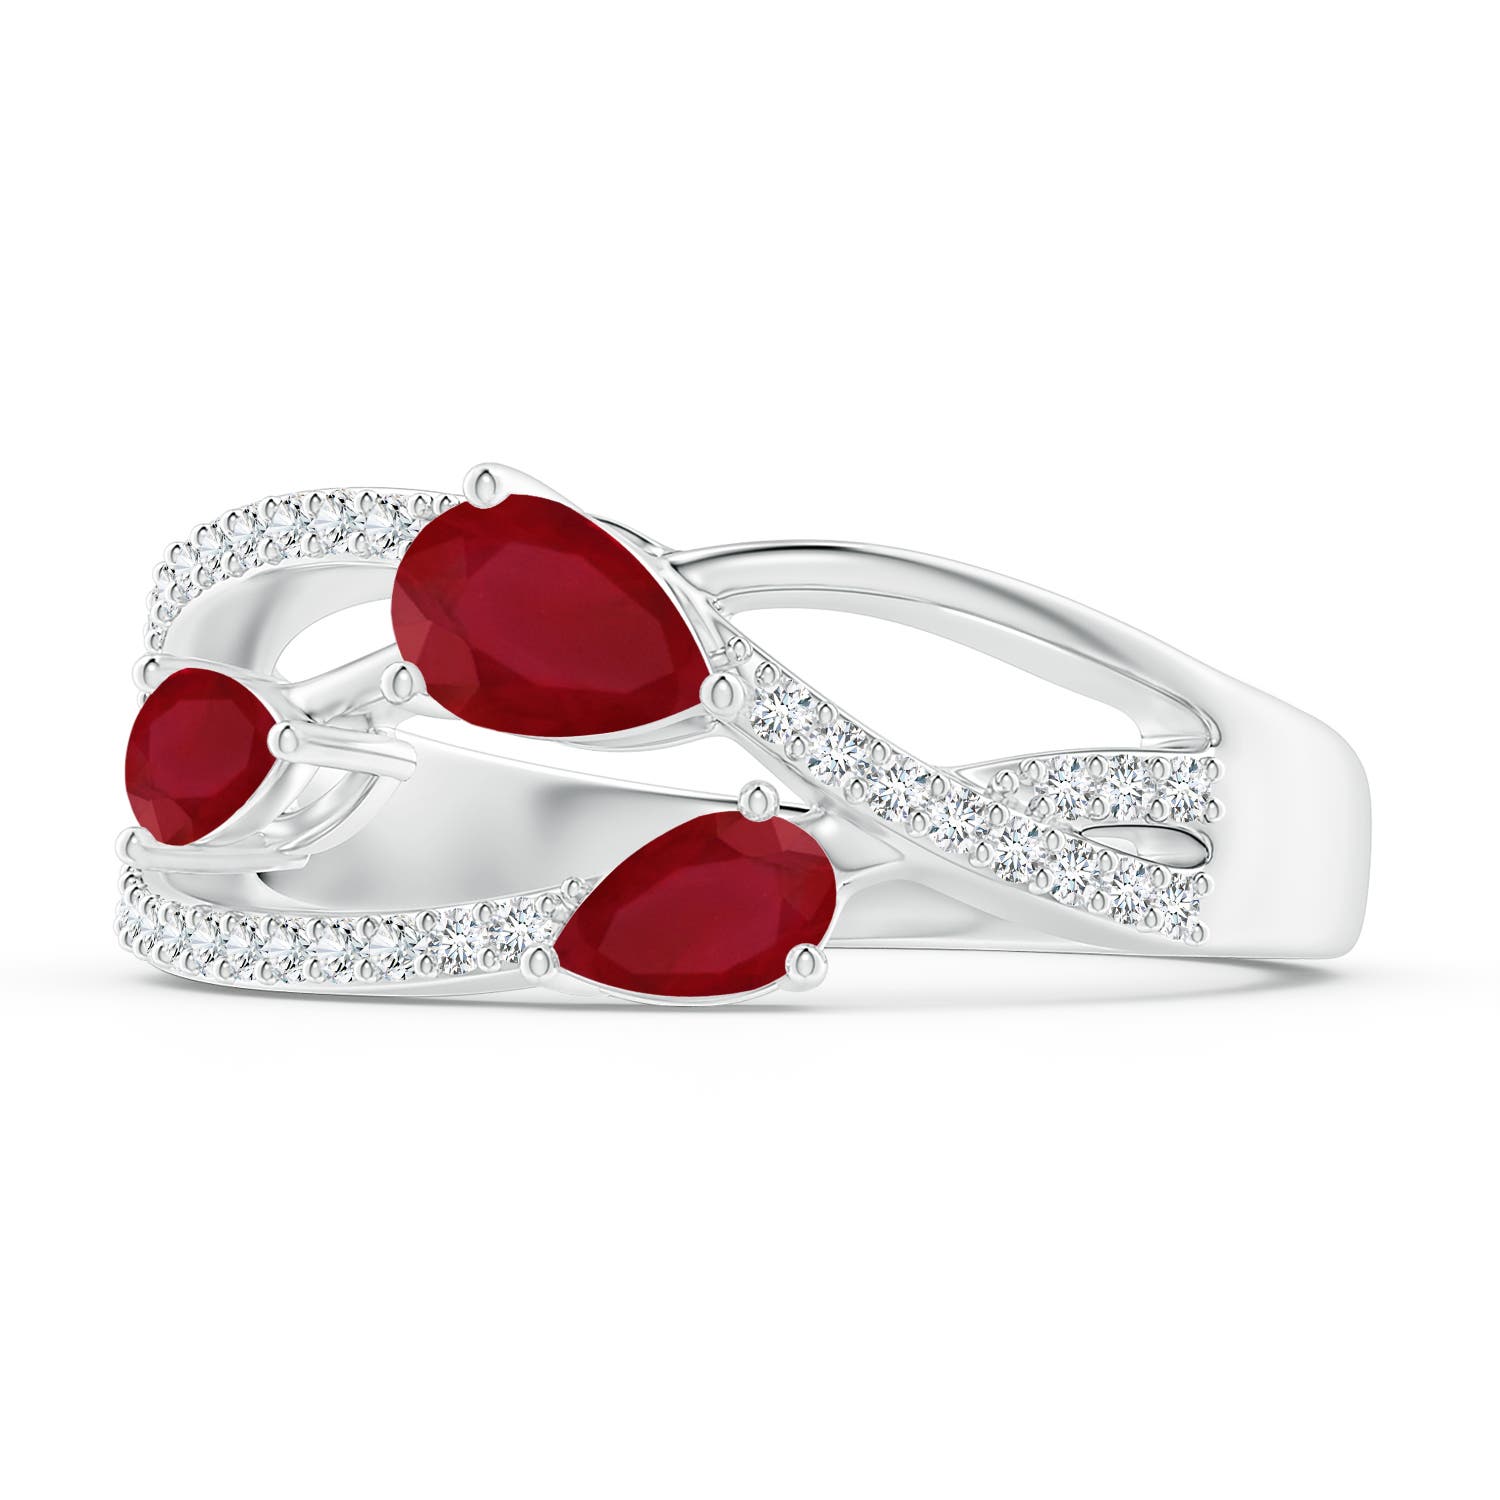 AA - Ruby / 1.03 CT / 14 KT White Gold